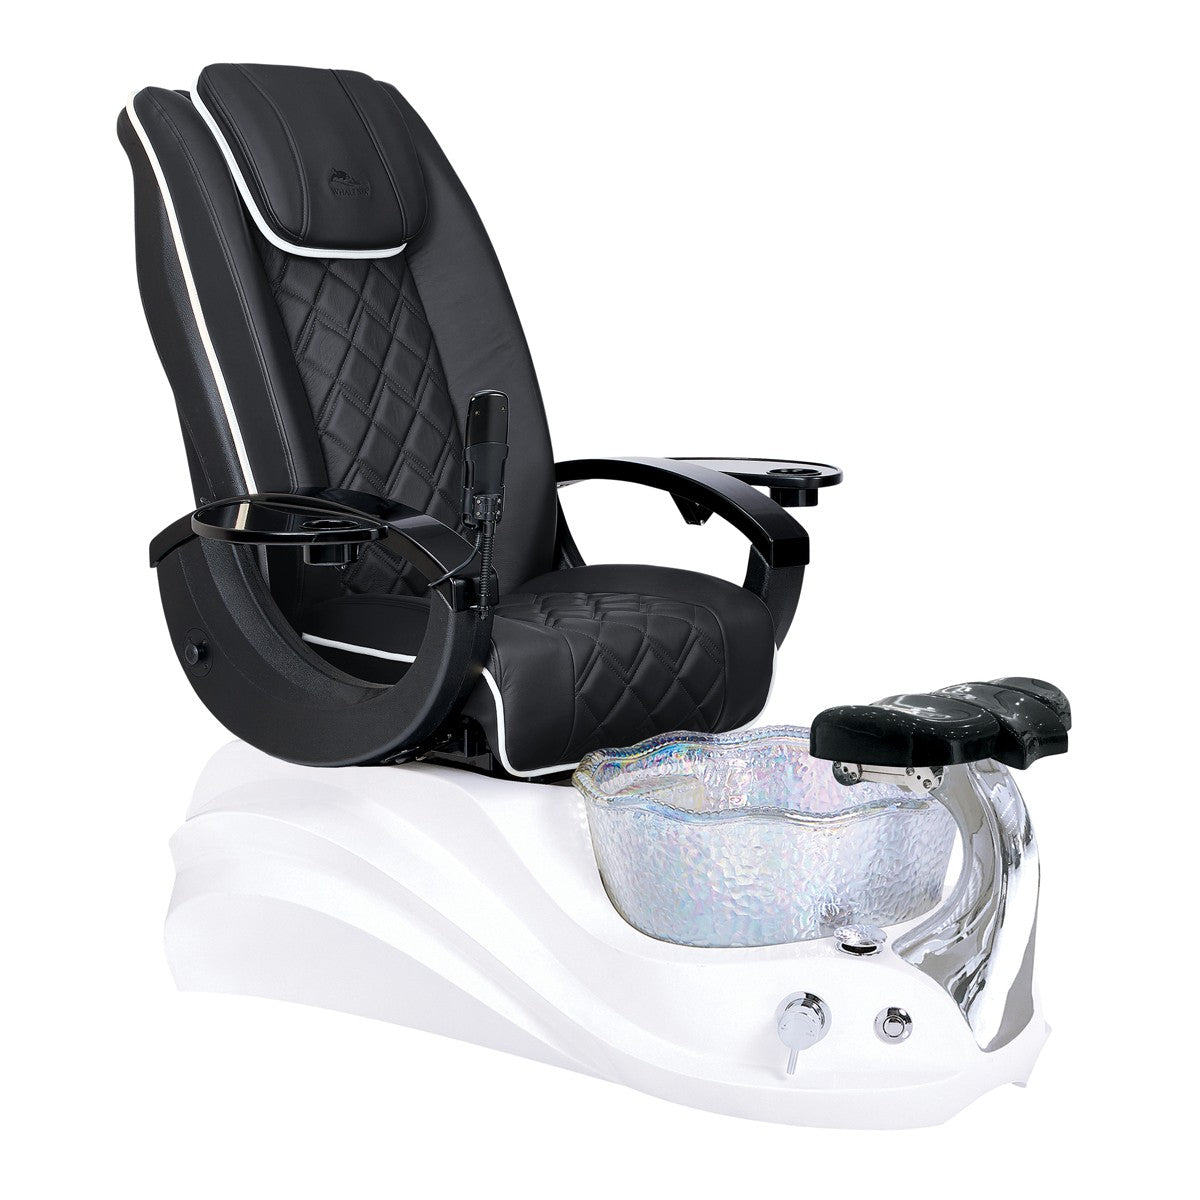 Whale Spa Whale Spa Pedicure Chair Crane with Free Trolley &amp; Tech Stool Pedicure Chair - ChairsThatGive